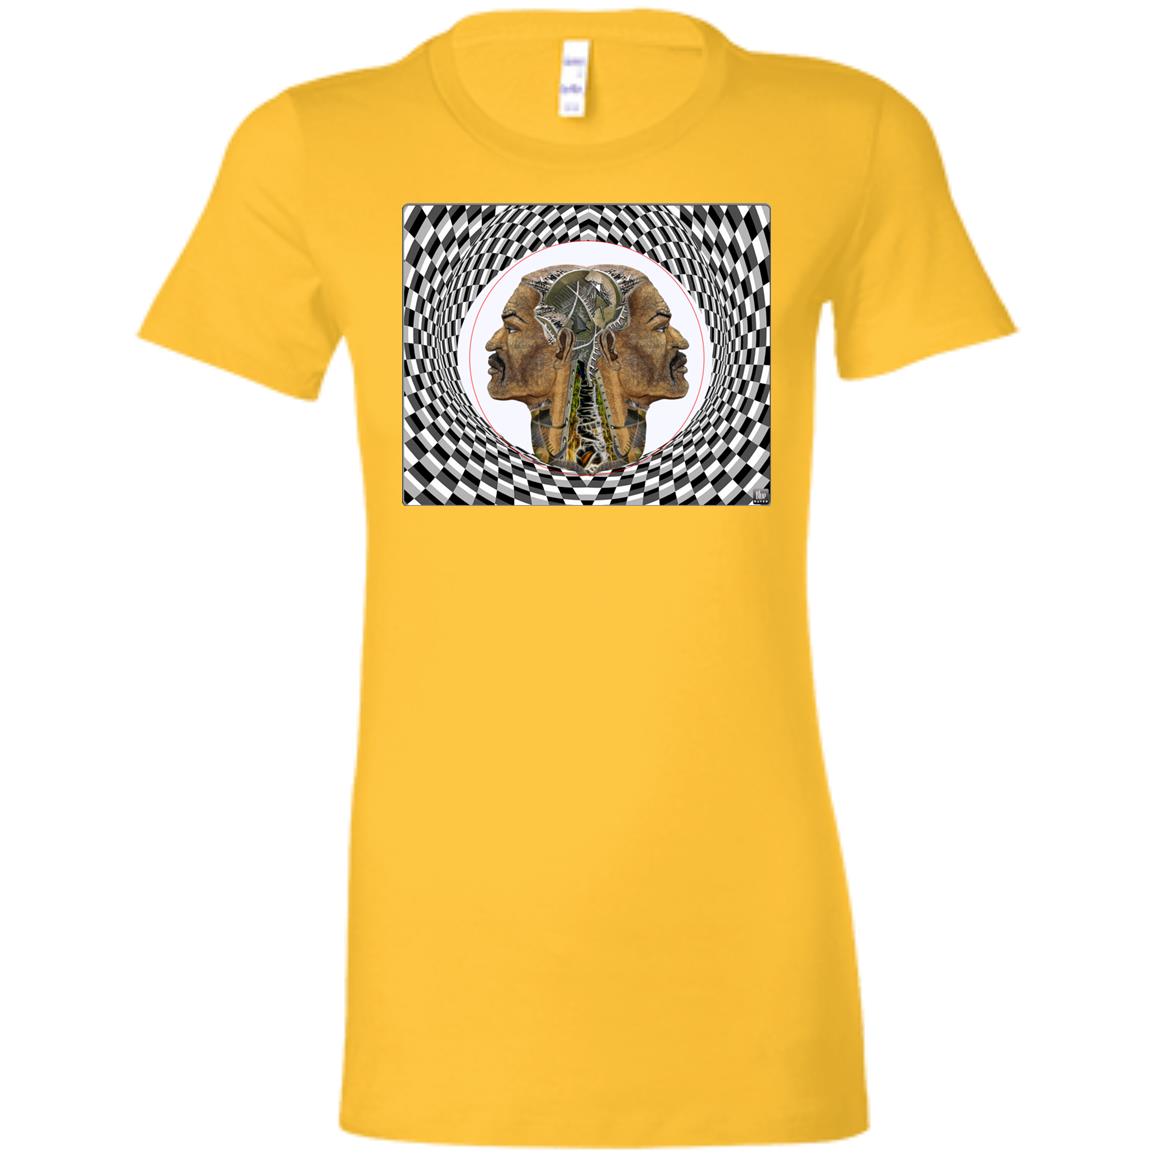 MAN IN THE MACHINE - Women's Fitted T-Shirt